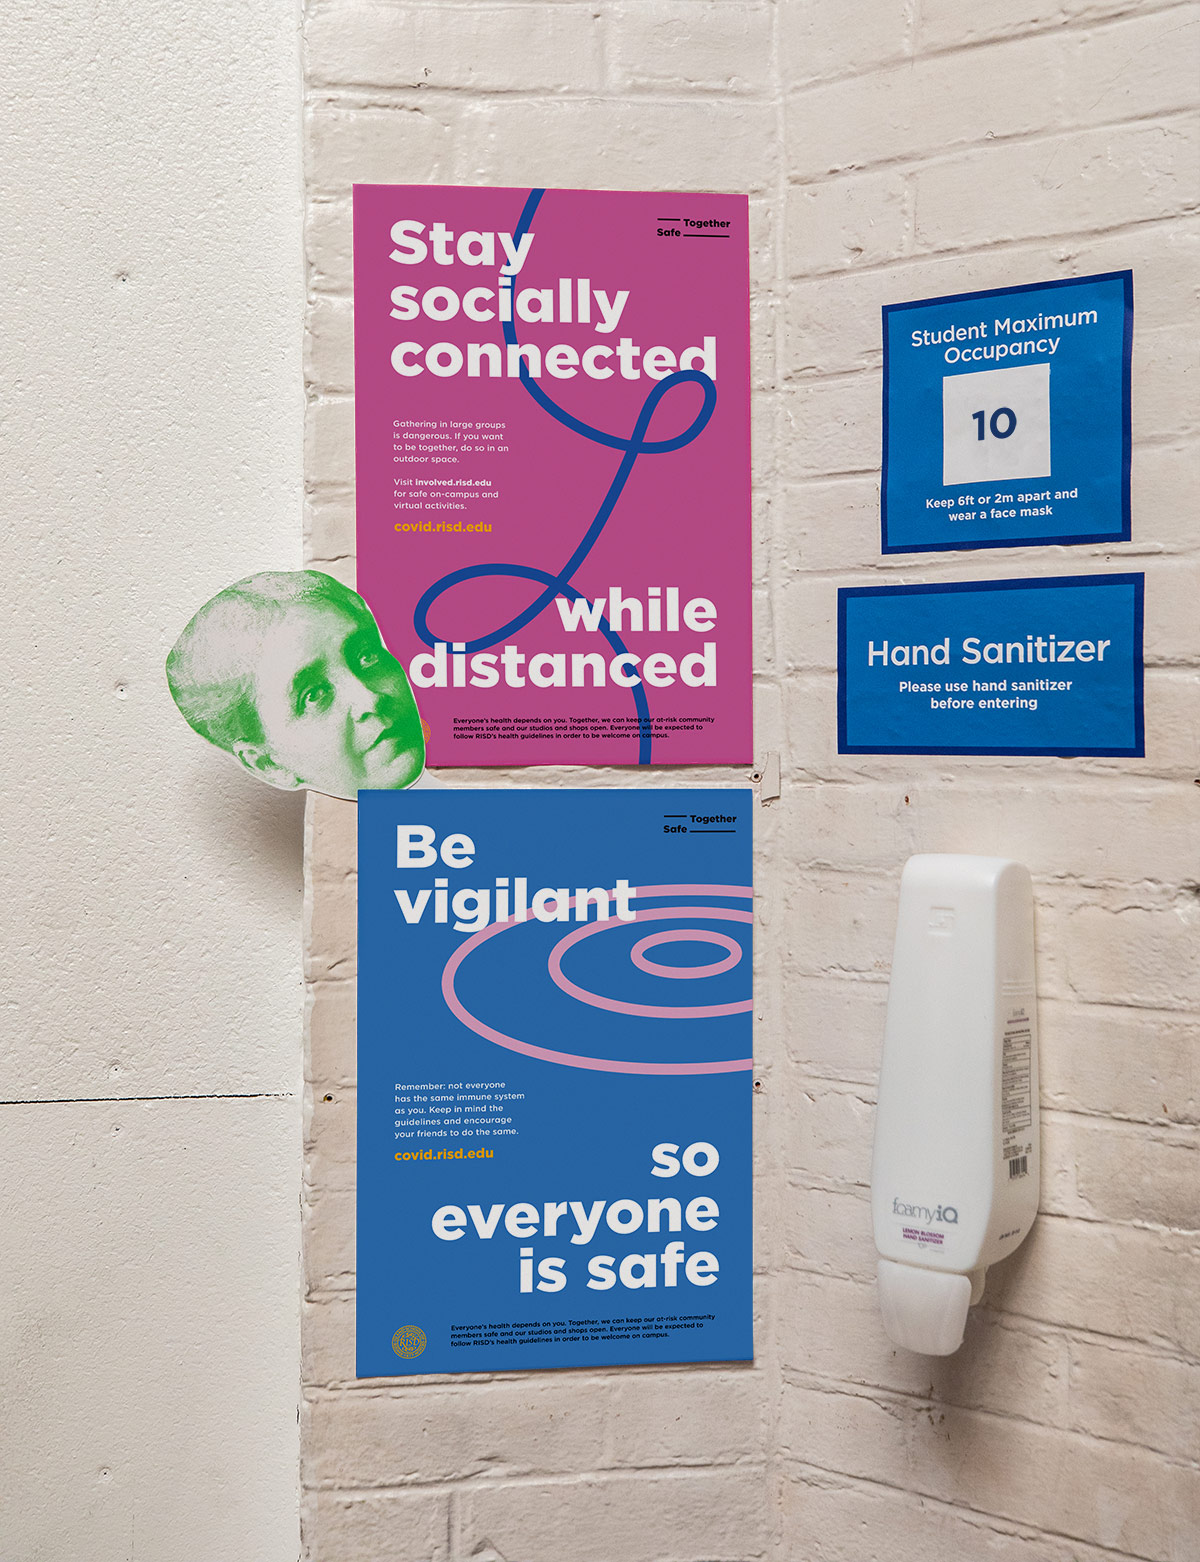 RISD Safe Together posters in a communal area with hand sanitizer